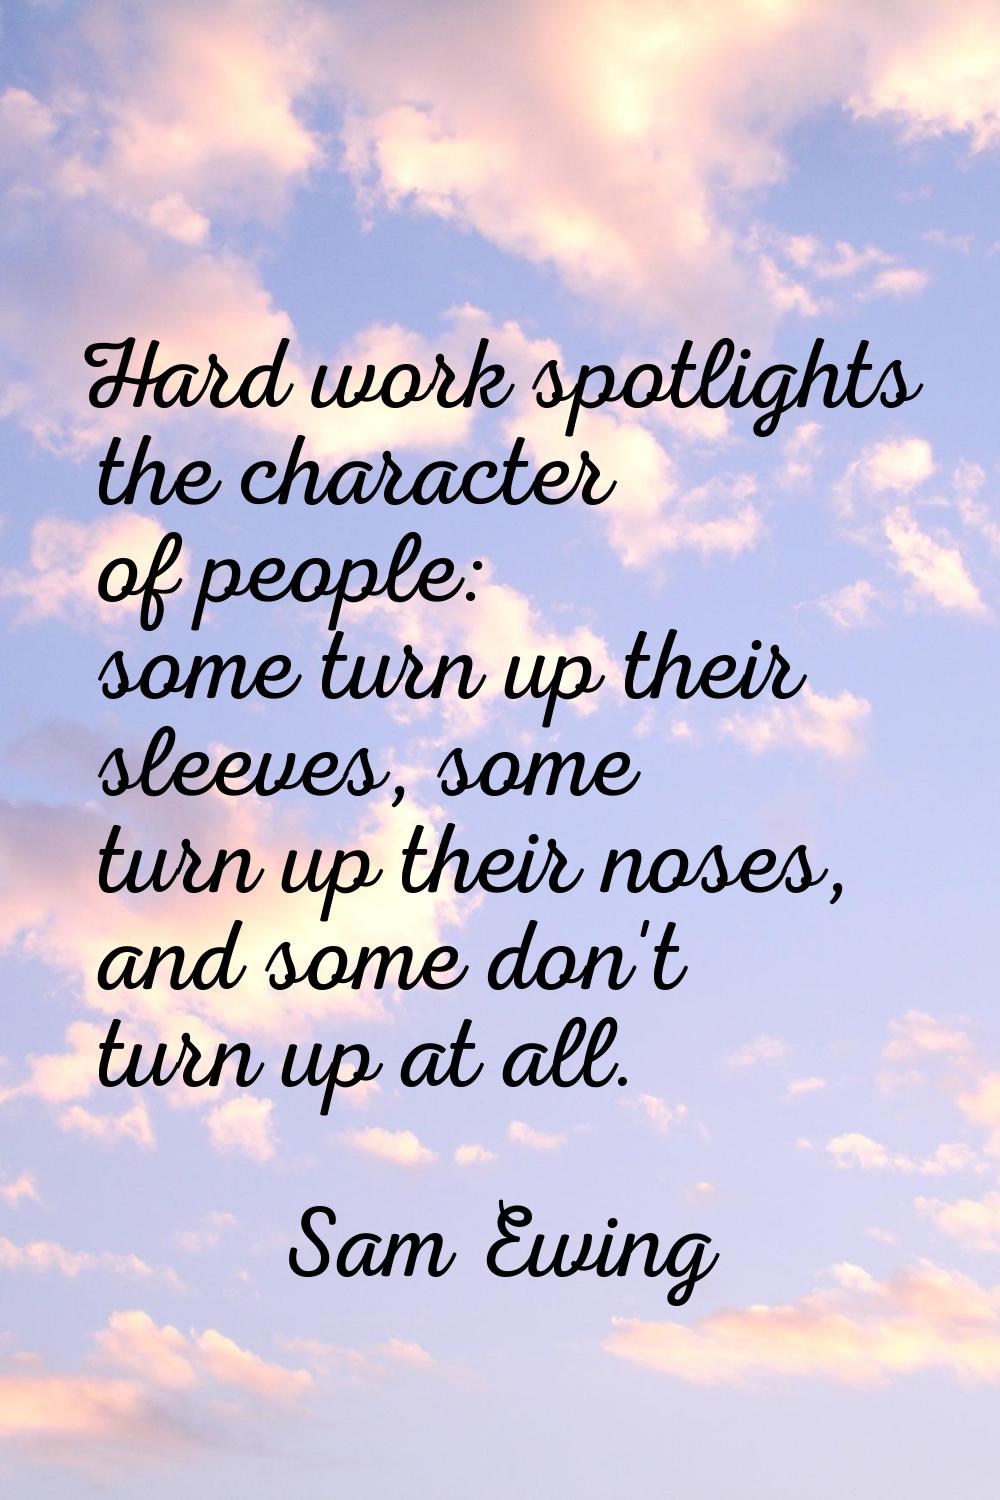 Hard work spotlights the character of people: some turn up their sleeves, some turn up their noses,